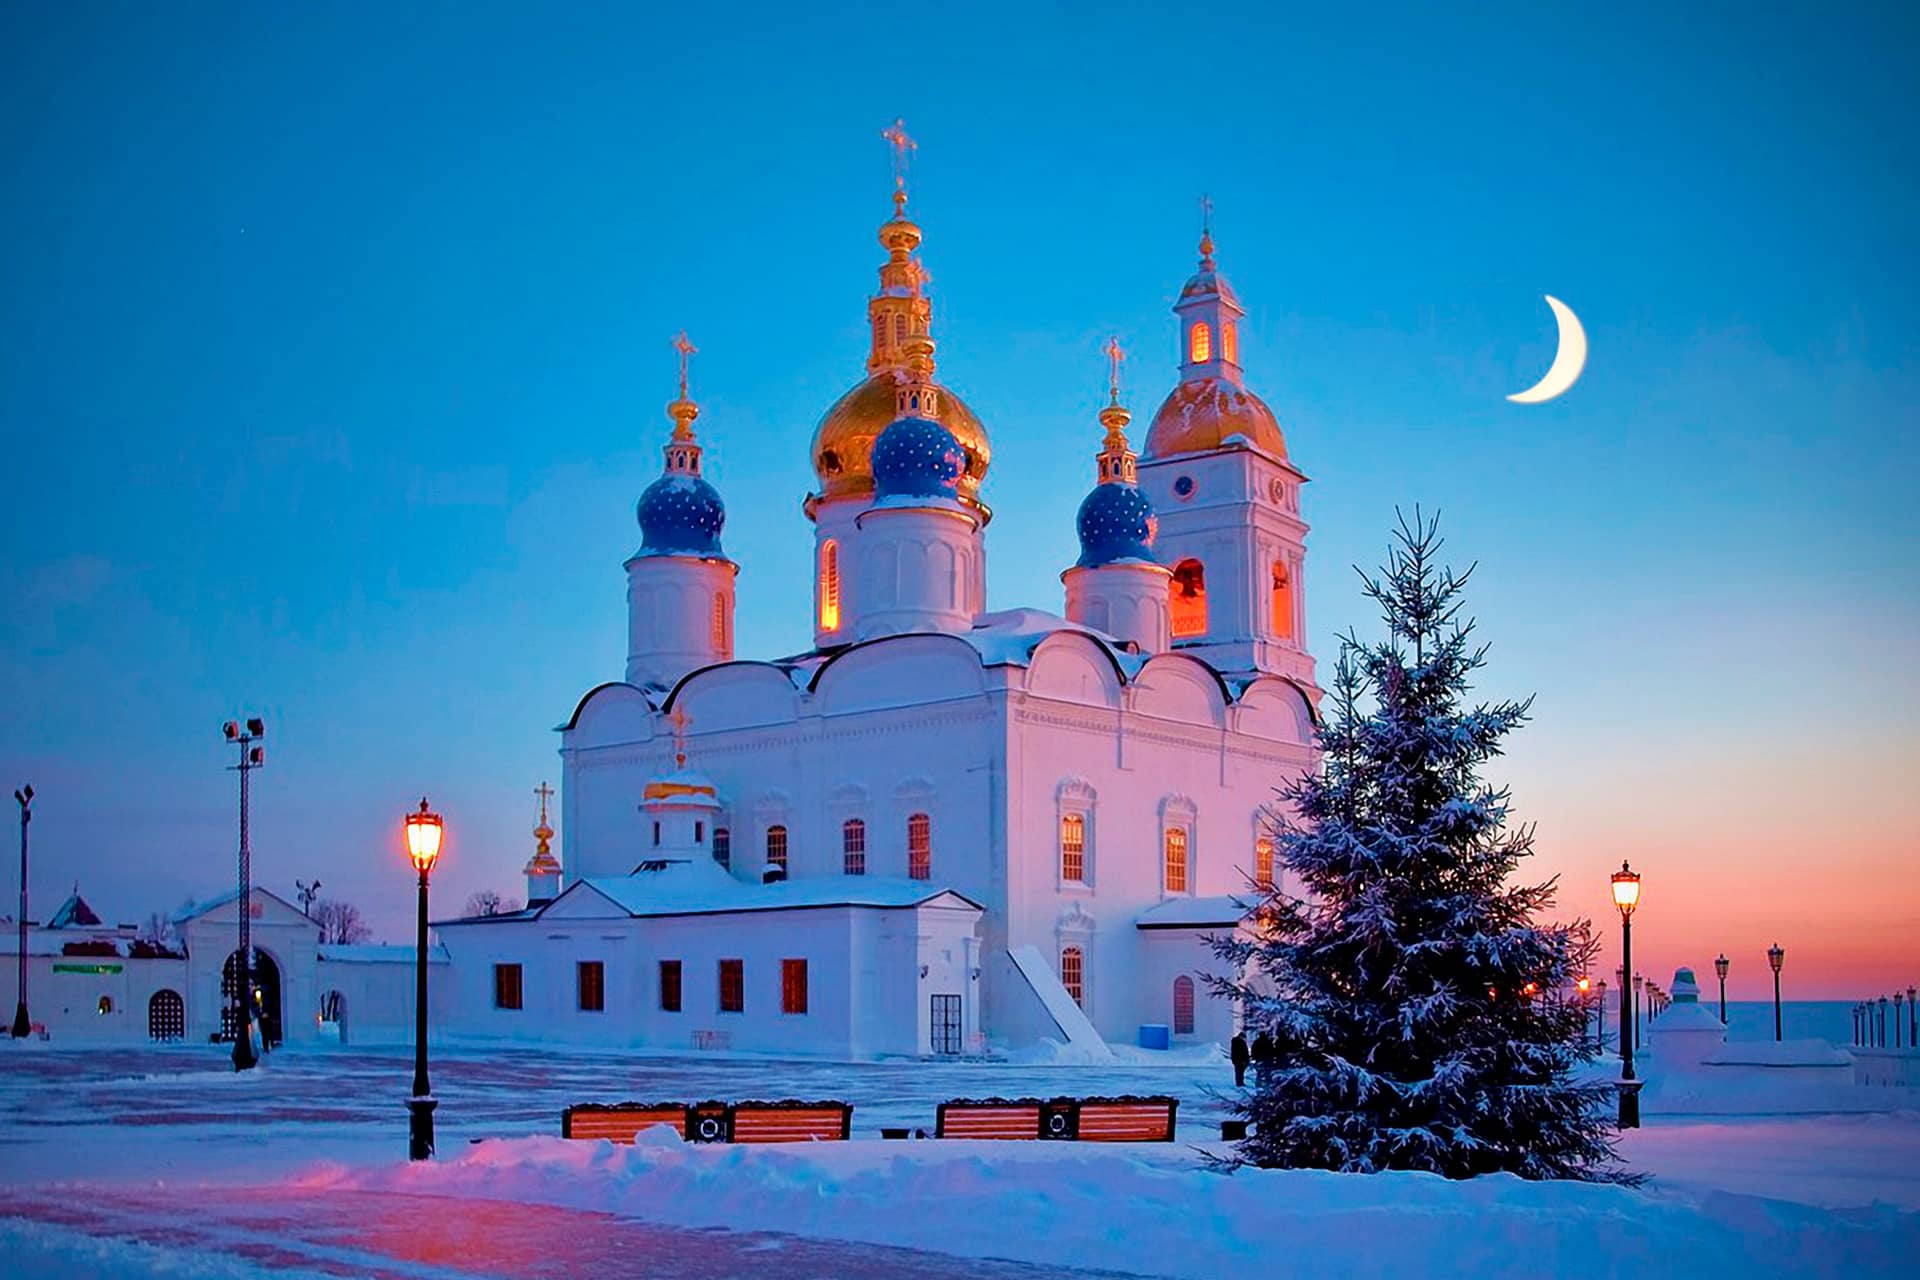 A white quadrate cathedral with one golden dome in the center and four blue smaller domes around it during the pink sunset